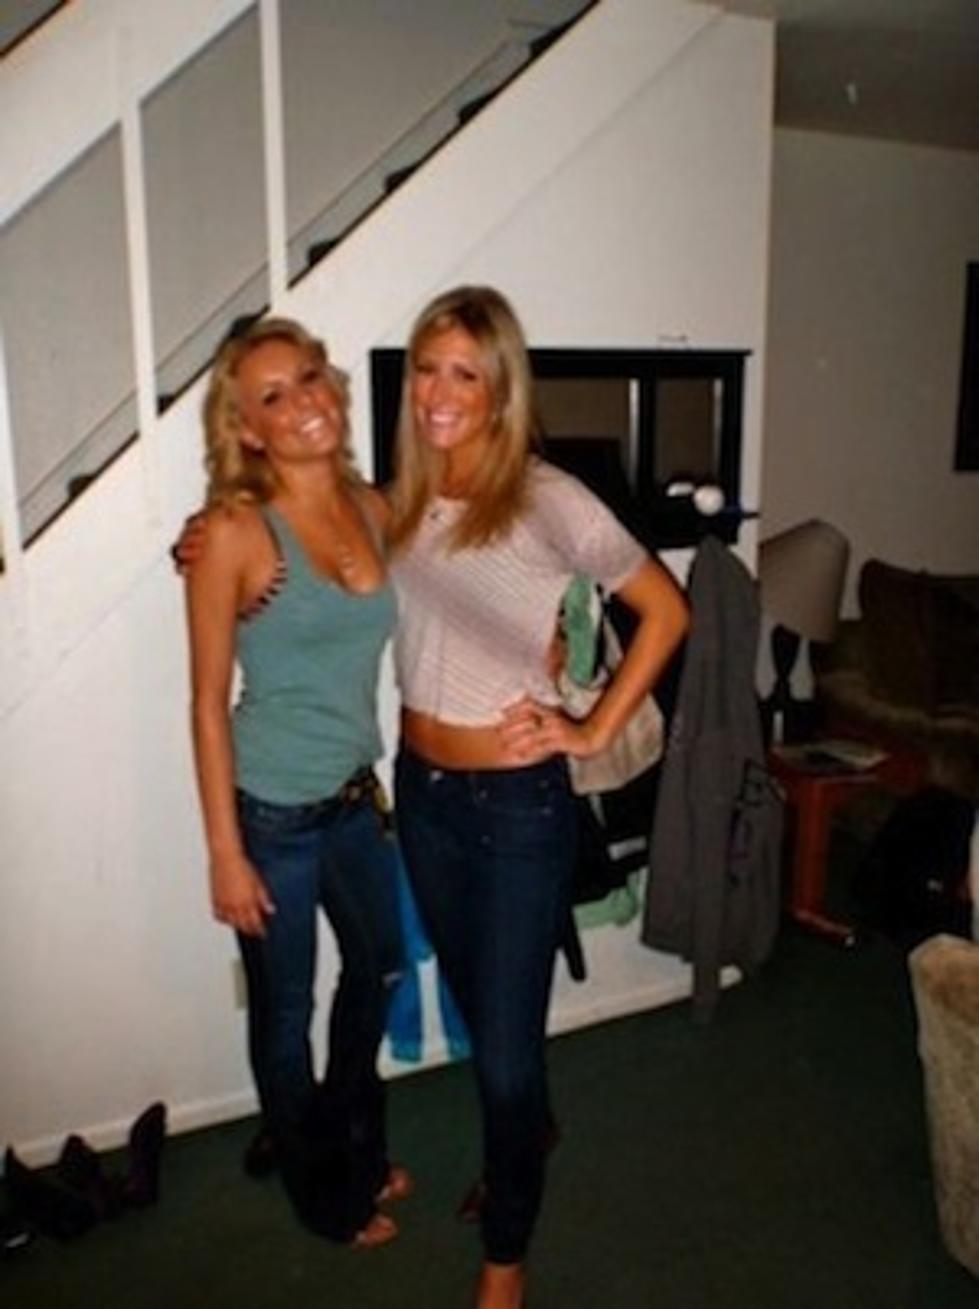 Let Us Introduce You To a Couple of Hot Women That Need a Roomie